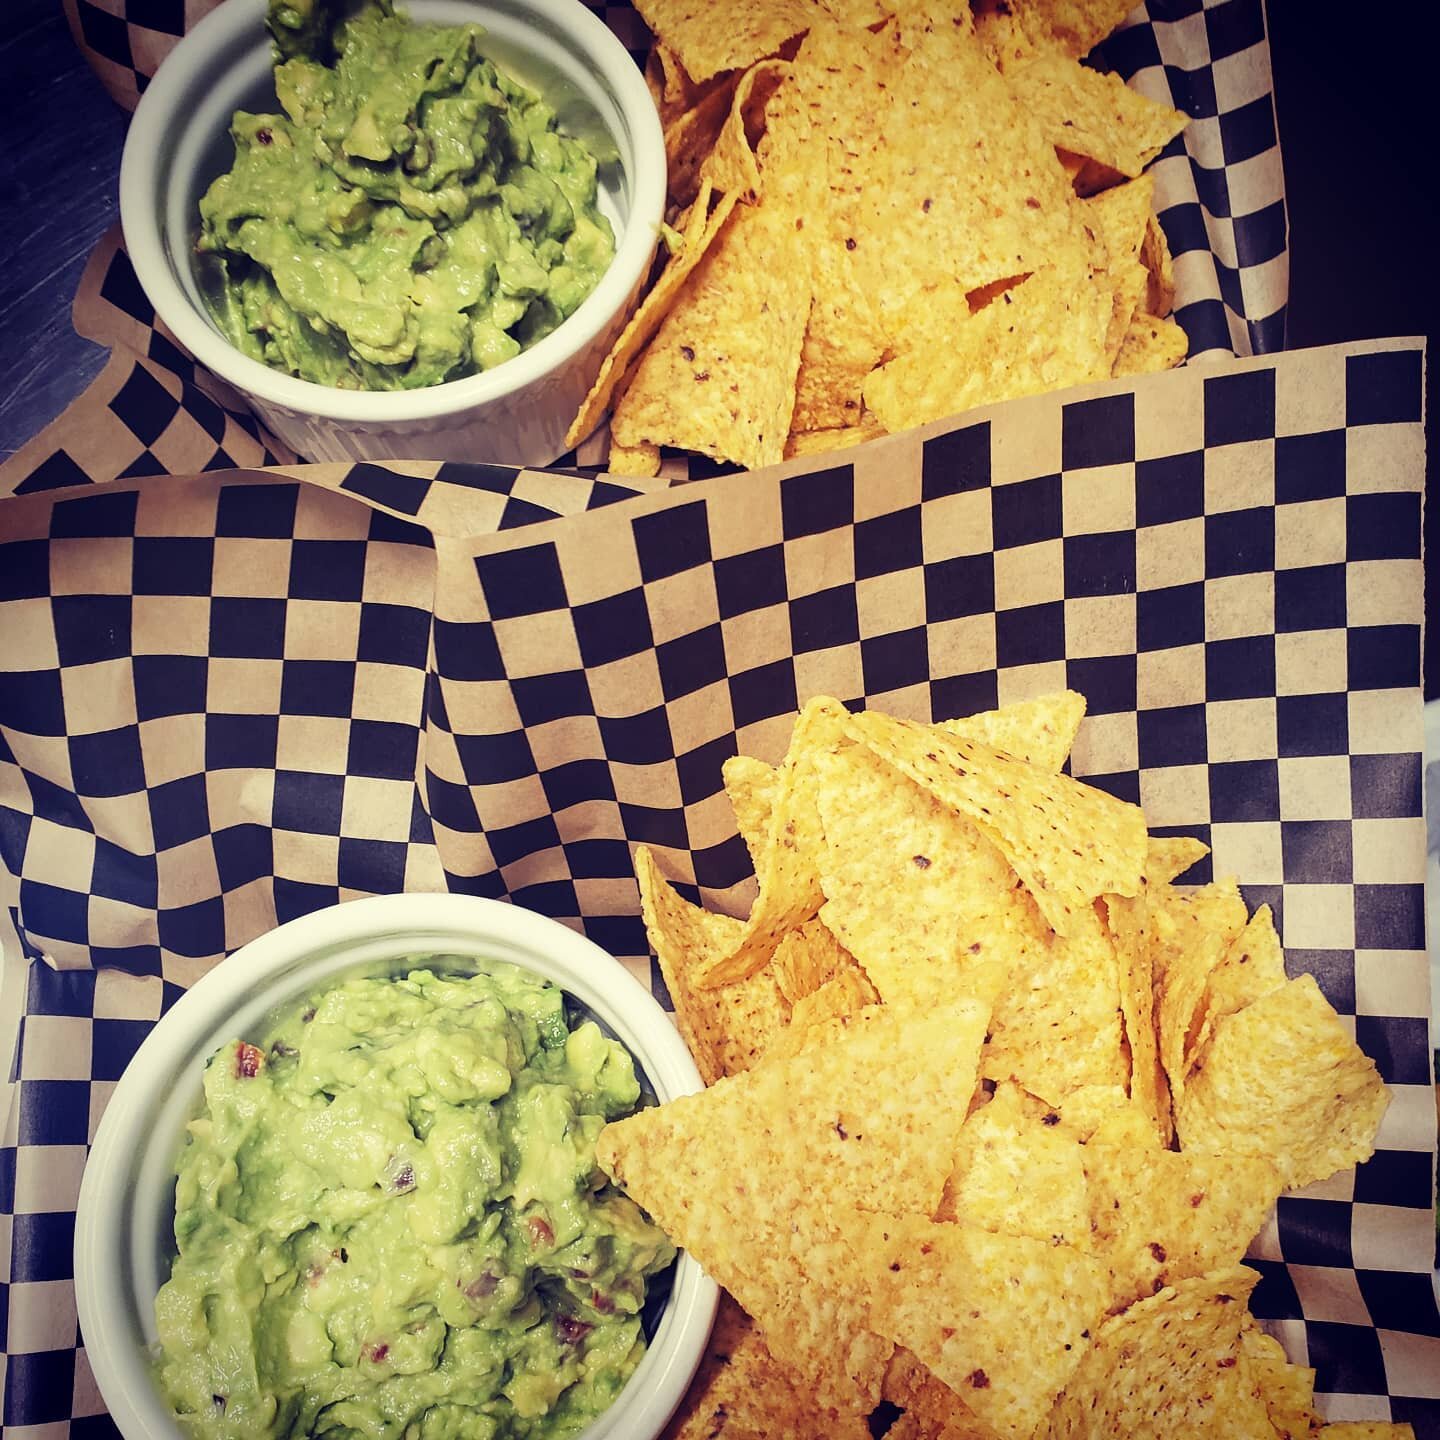 When 1 Guacamole 🥑 just won't do, you order 2!! 🥑🥑 Happy #tacotuesday 😊  We know this is such a tease, since we aren't open until Friday,  but we'll just let you dream about your weekend noshing plans for a few days 😉

Friday: 3-8
Saturday: 12-8